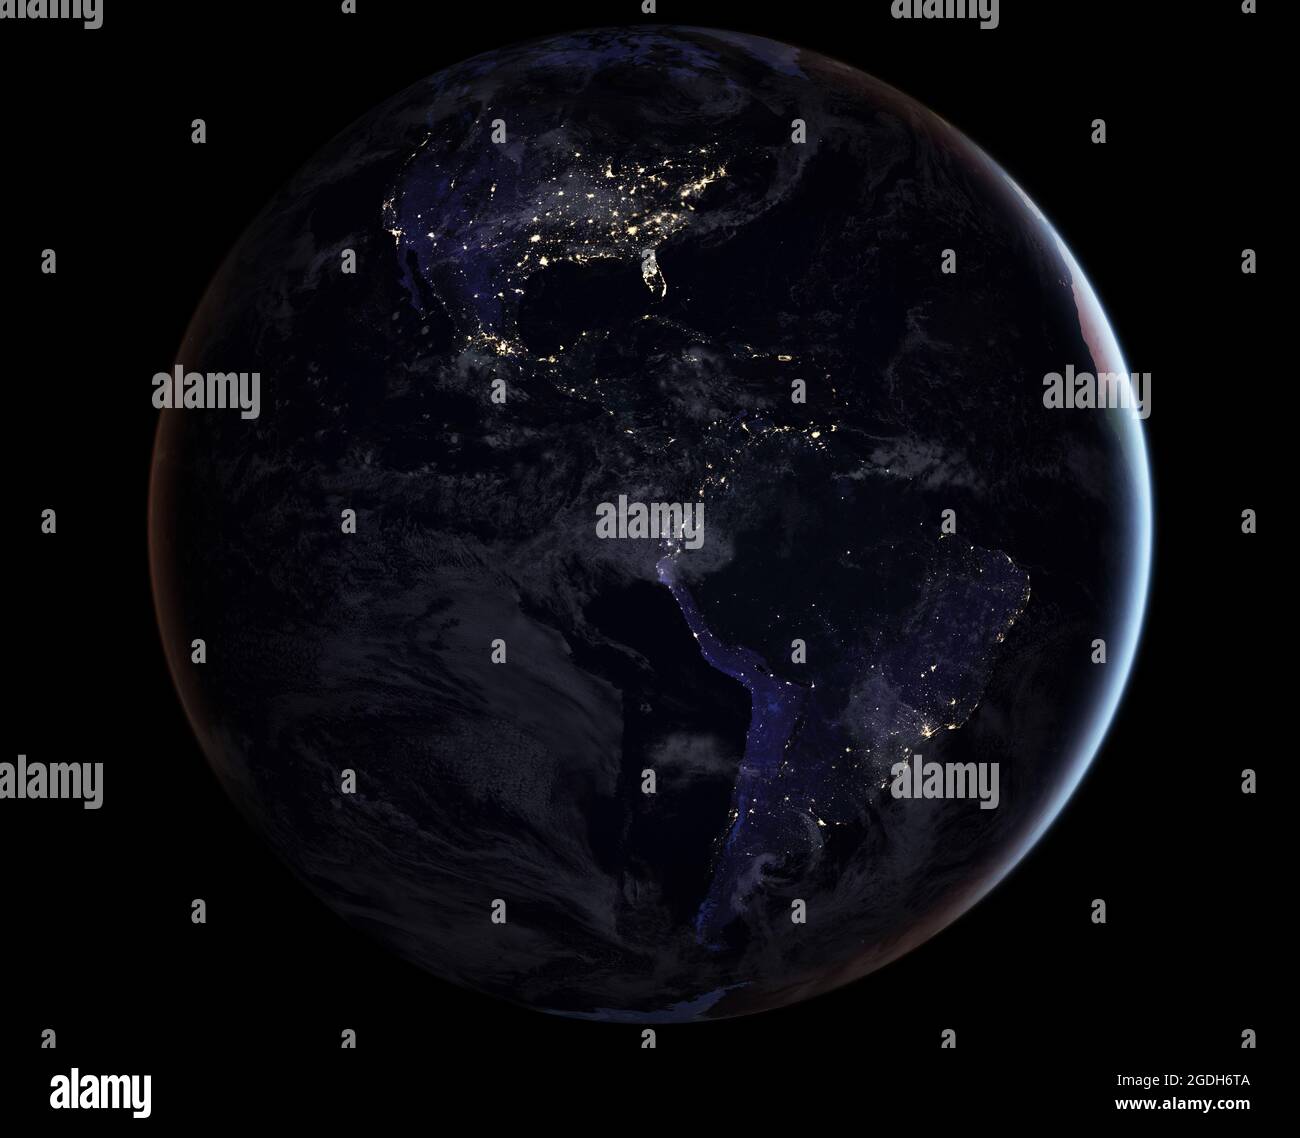 The earth at night as seen from spce, with the lights of towns and cities visible. Stock Photo